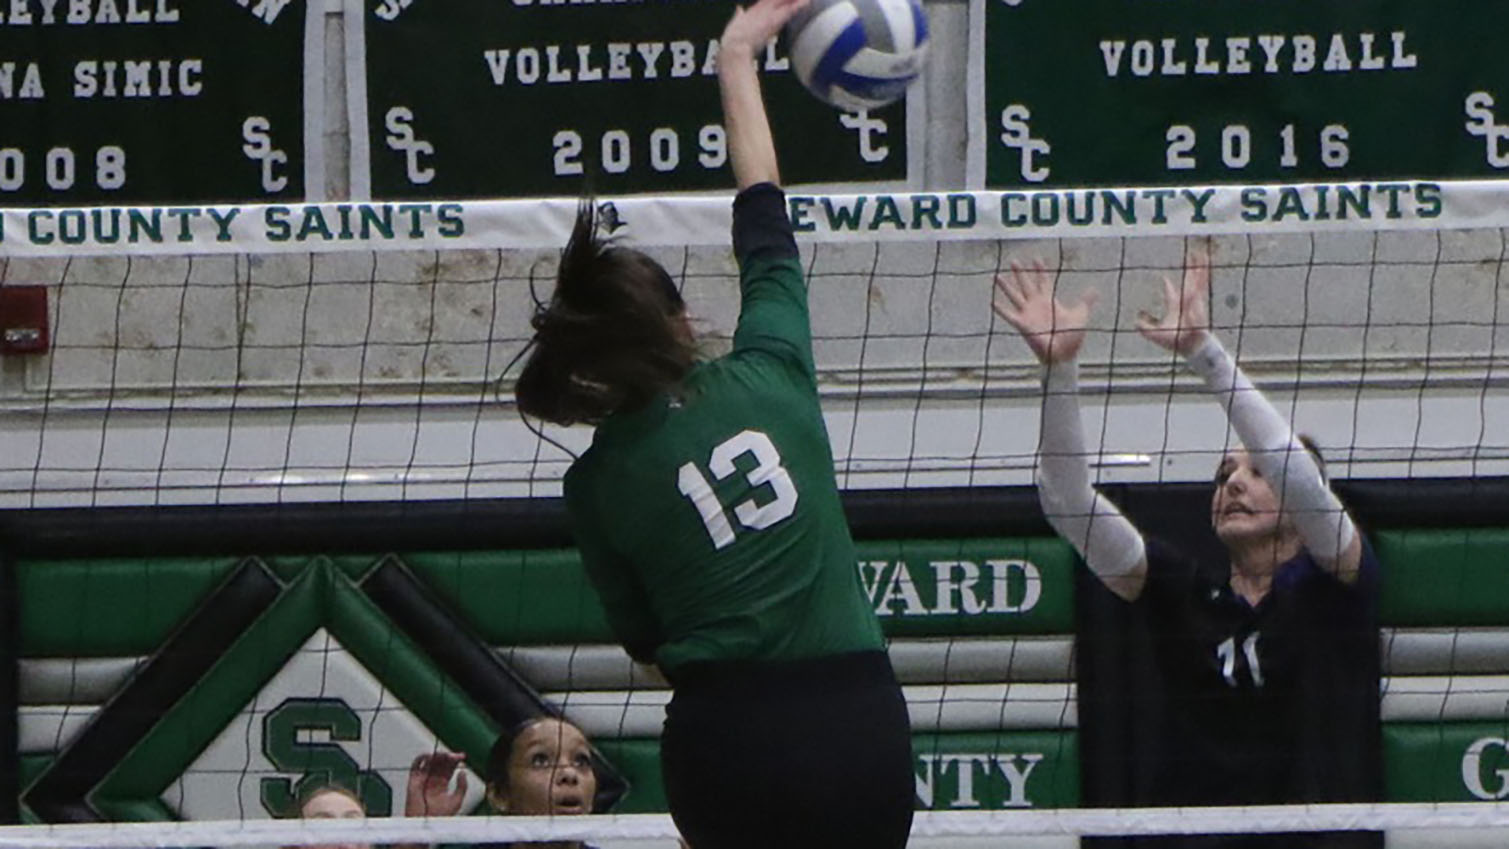 Seward County Falls in Sweep Against Colby Trojans